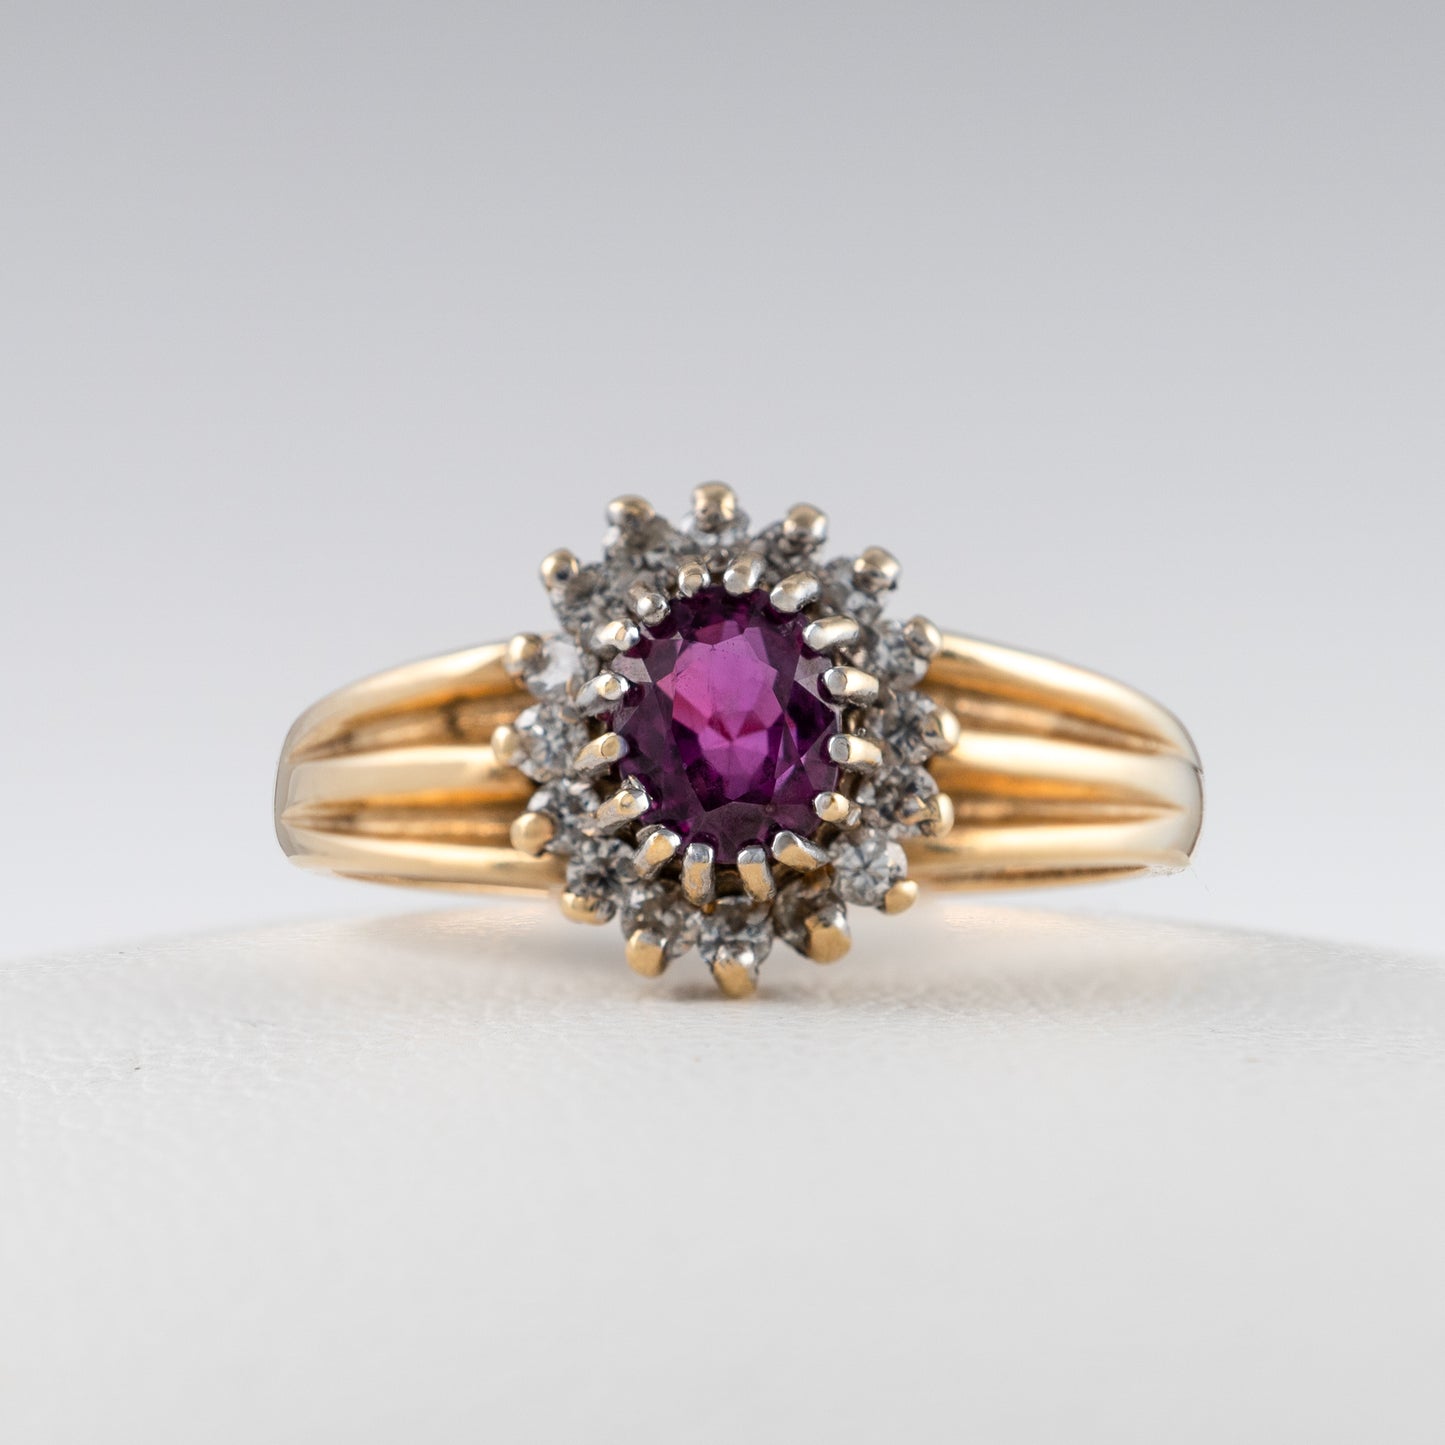 Pre-Owned Ruby Diamond Halo Ring 9ct Gold